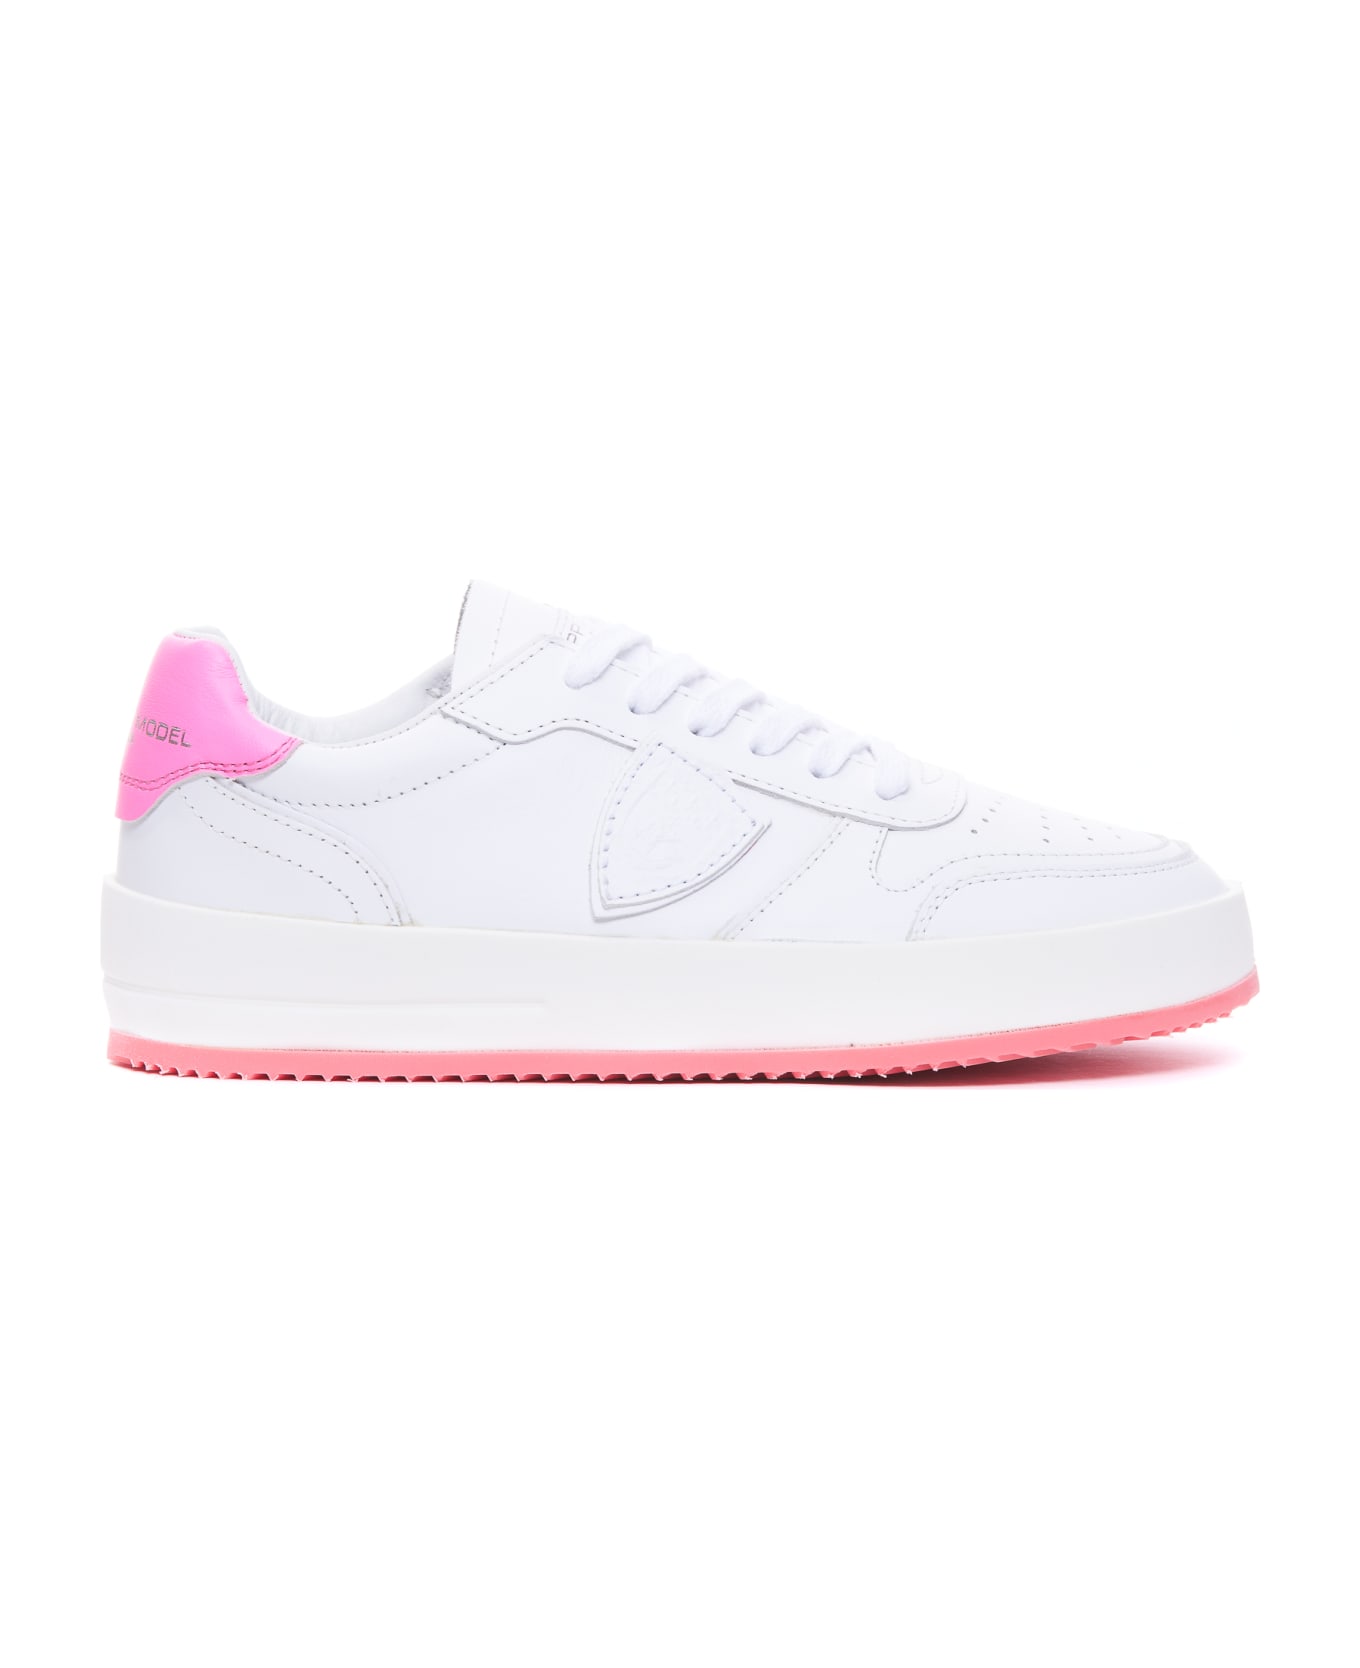 Philippe Model Nice Low Sneakers - Veau Neon Blanc Fucsia